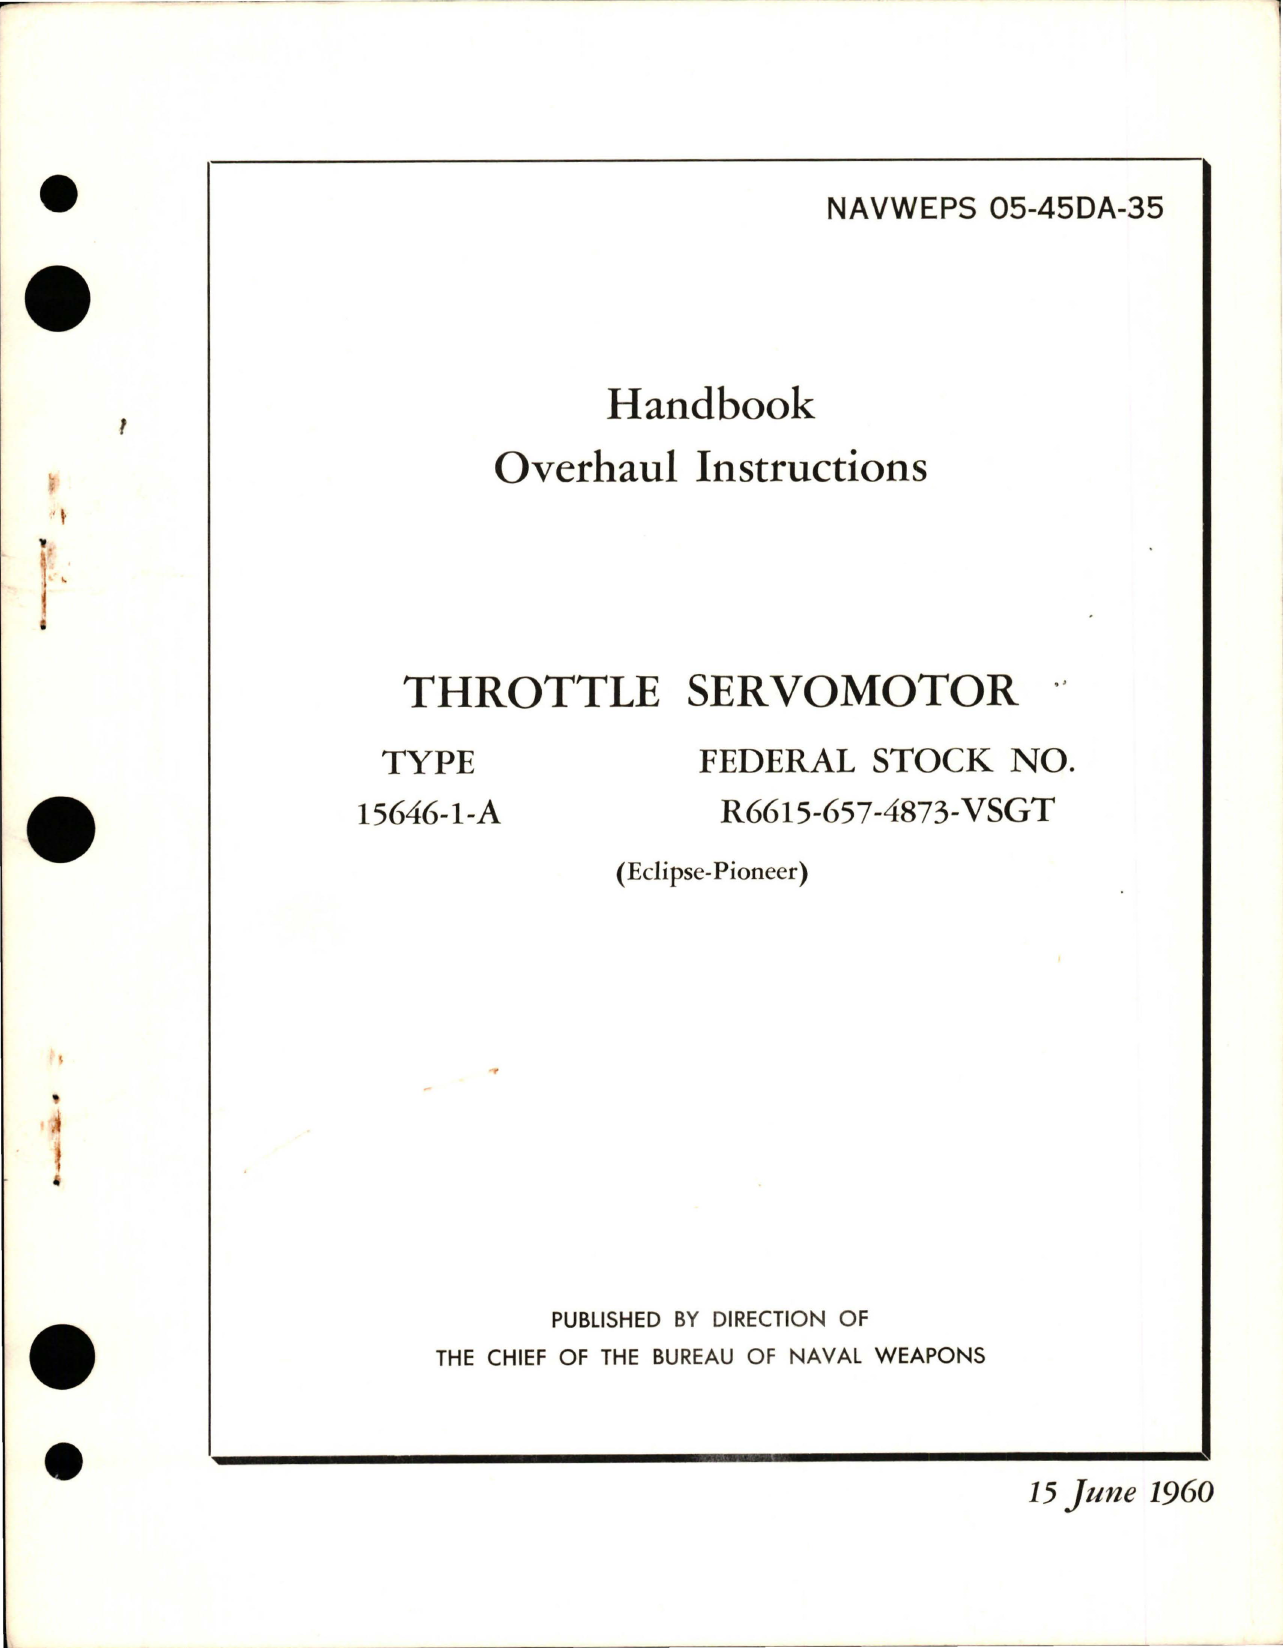 Sample page 1 from AirCorps Library document: Overhaul Instructions for Throttle Servomotor - Type 15646-1-A